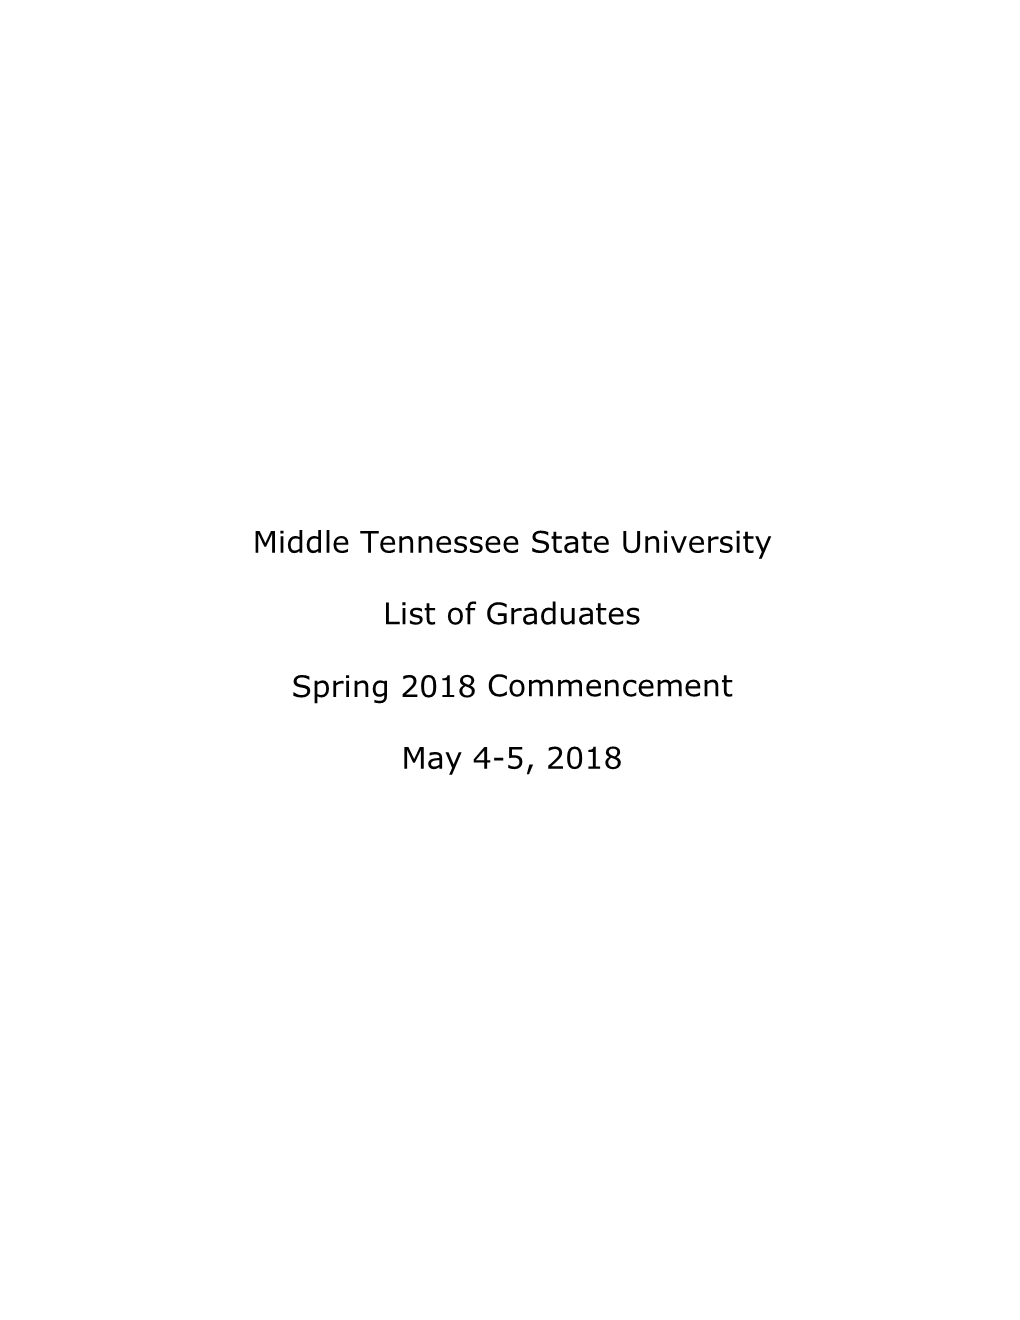 Middle Tennessee State University List of Graduates Spring 2018